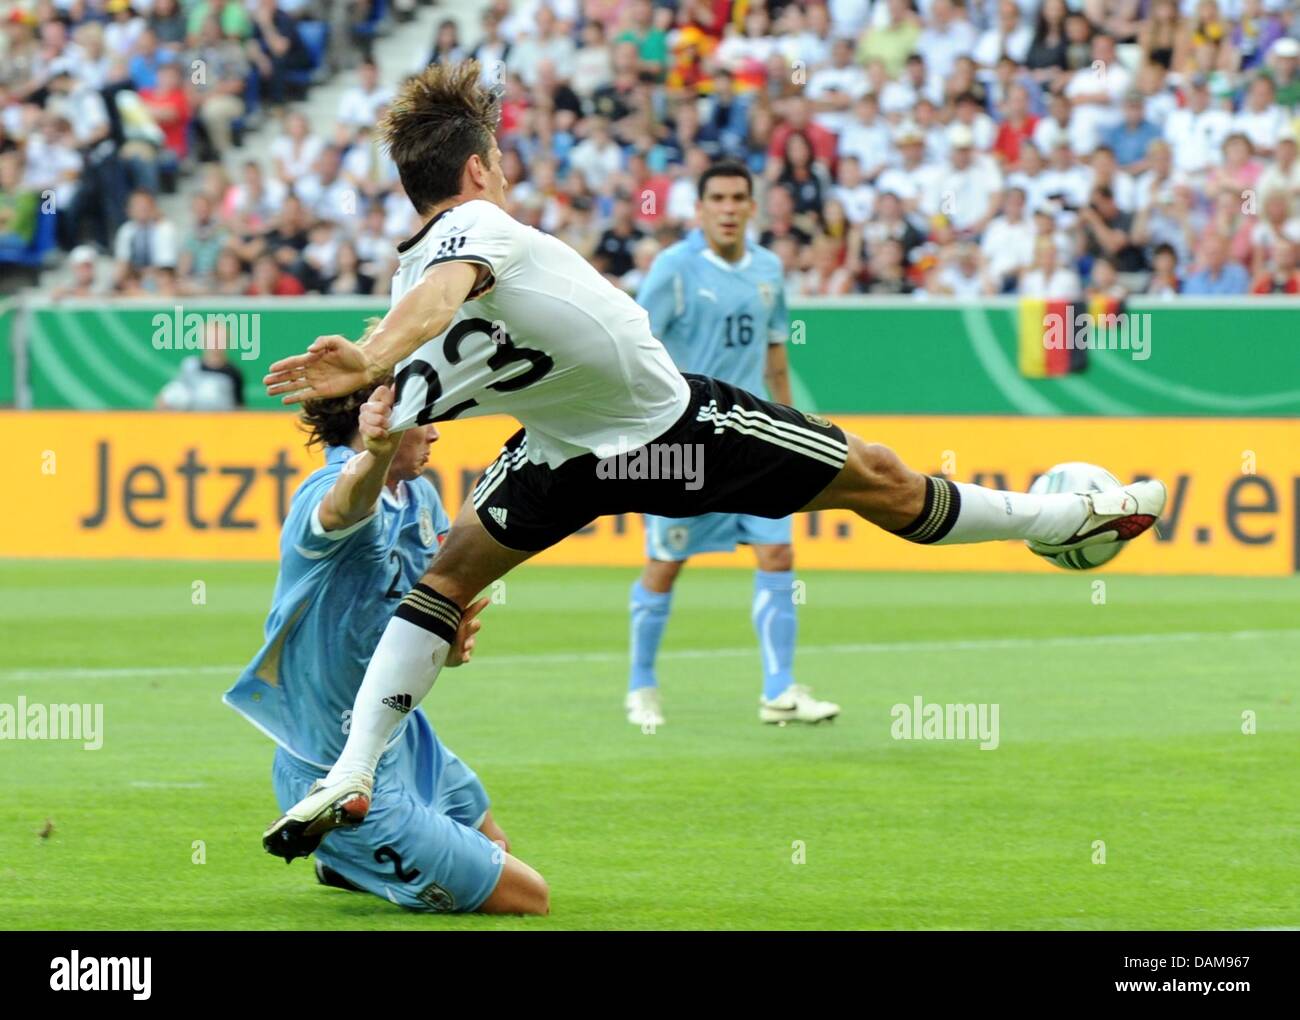 Germany's Mario Gomez (r) and Diego Lugano (l) of Uruguay vie for the ball during the soccer friendly Germany vs. Uruguay at Rhein-Neckar-Arena in Sinsheim, Germany, 29 May 2011. Germany won the friendly match 2-1. Photo: Bernd Weissbrod Stock Photo